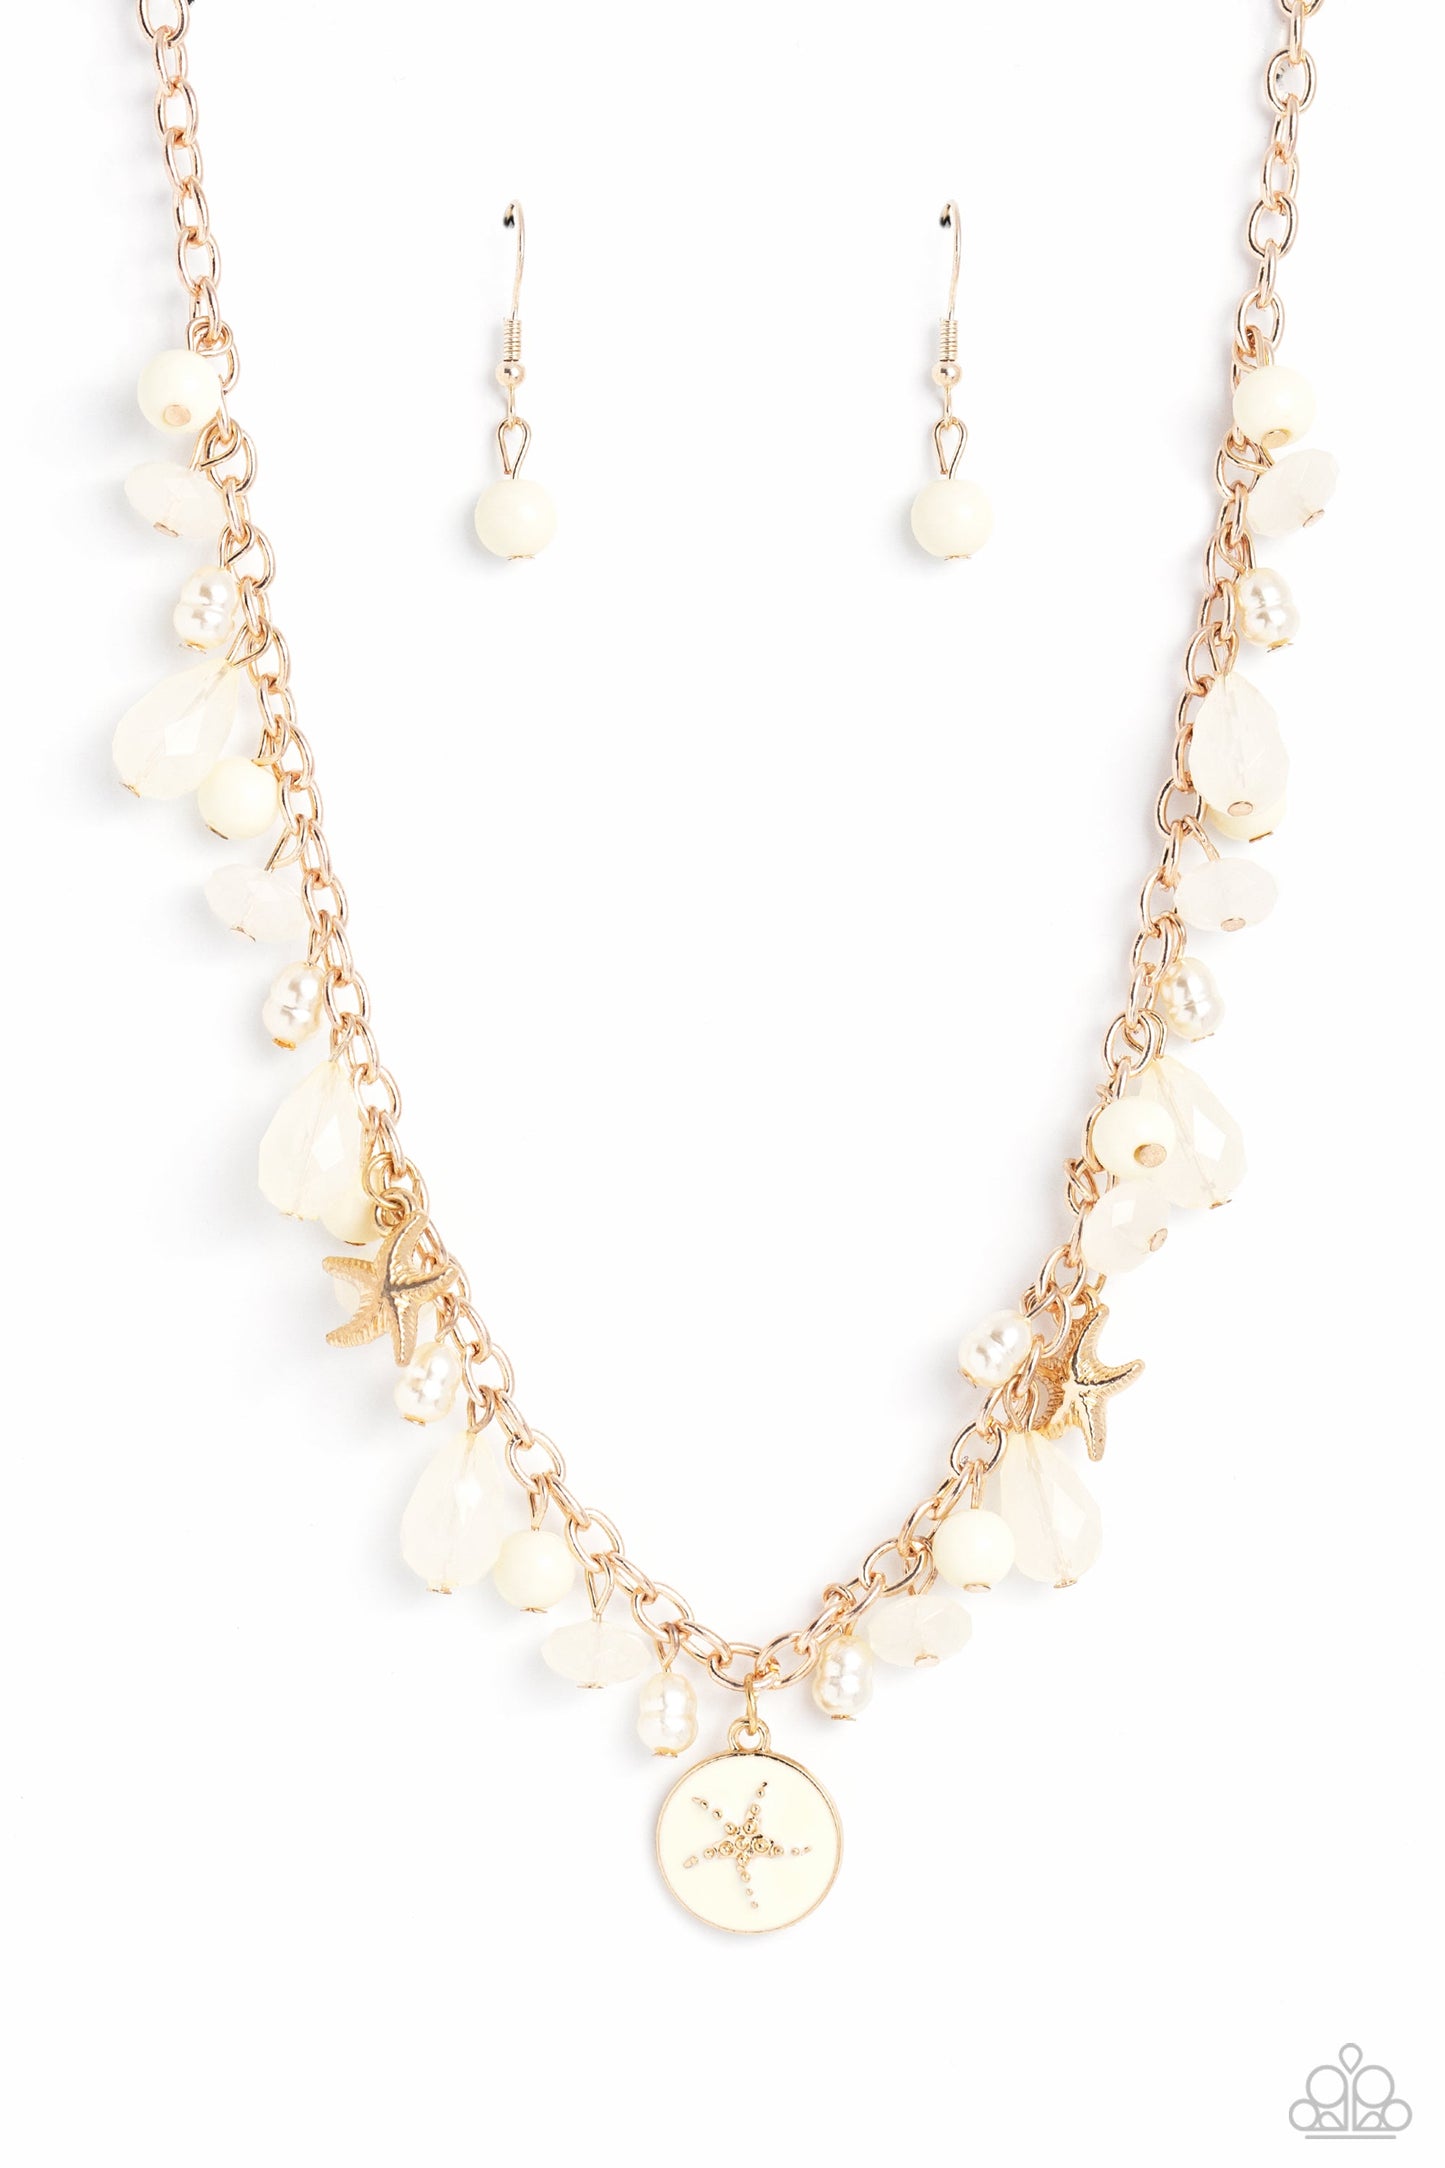 Surfer Serenade - Gold Starfish Charms/Ivory Beads/White Pearls Paparazzi Necklace & matching earrings